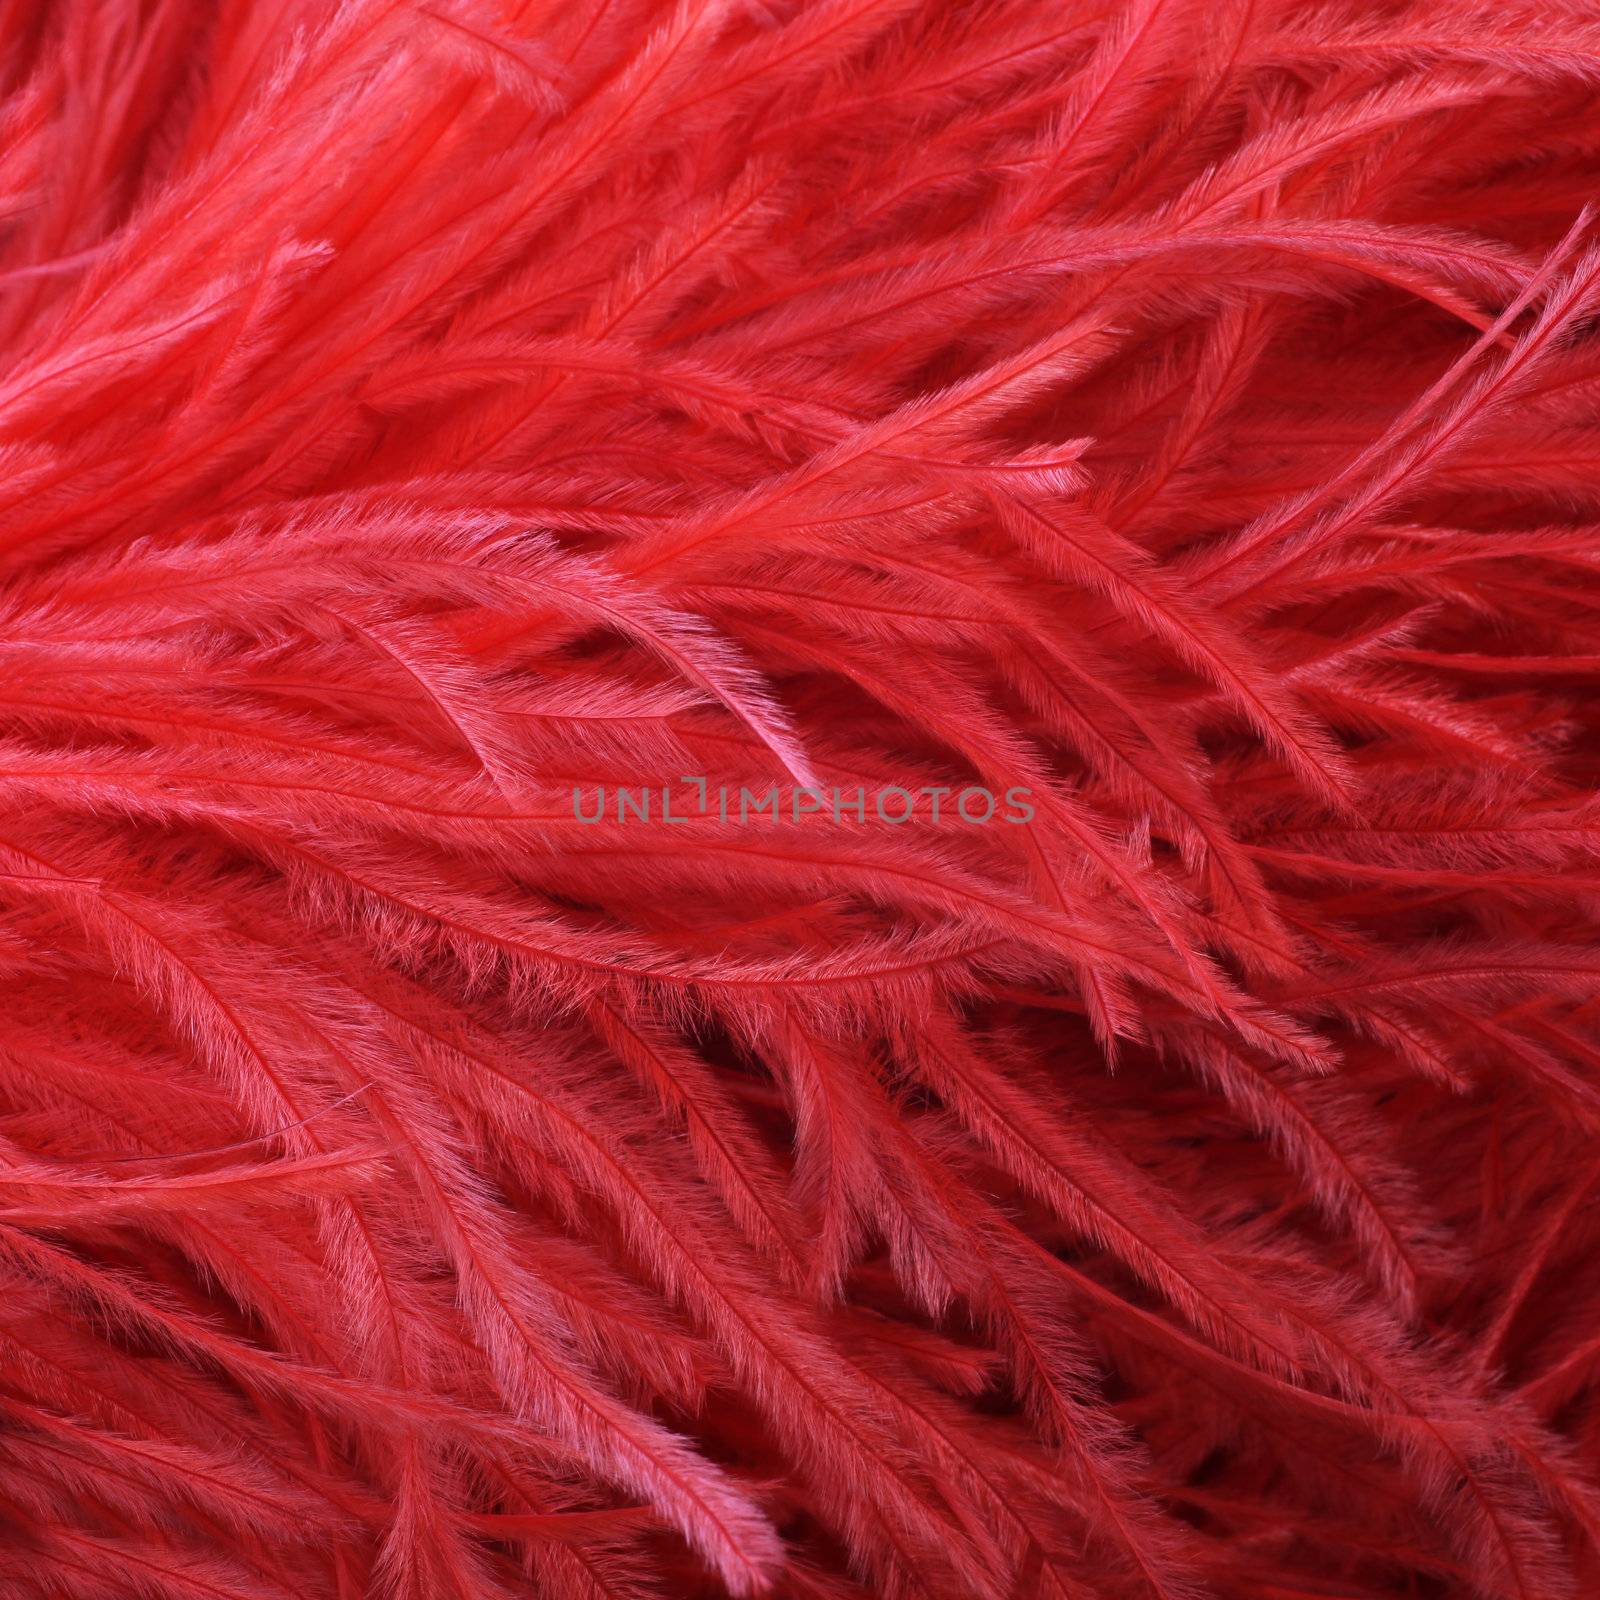 Red ostrich feather boa by Farina6000